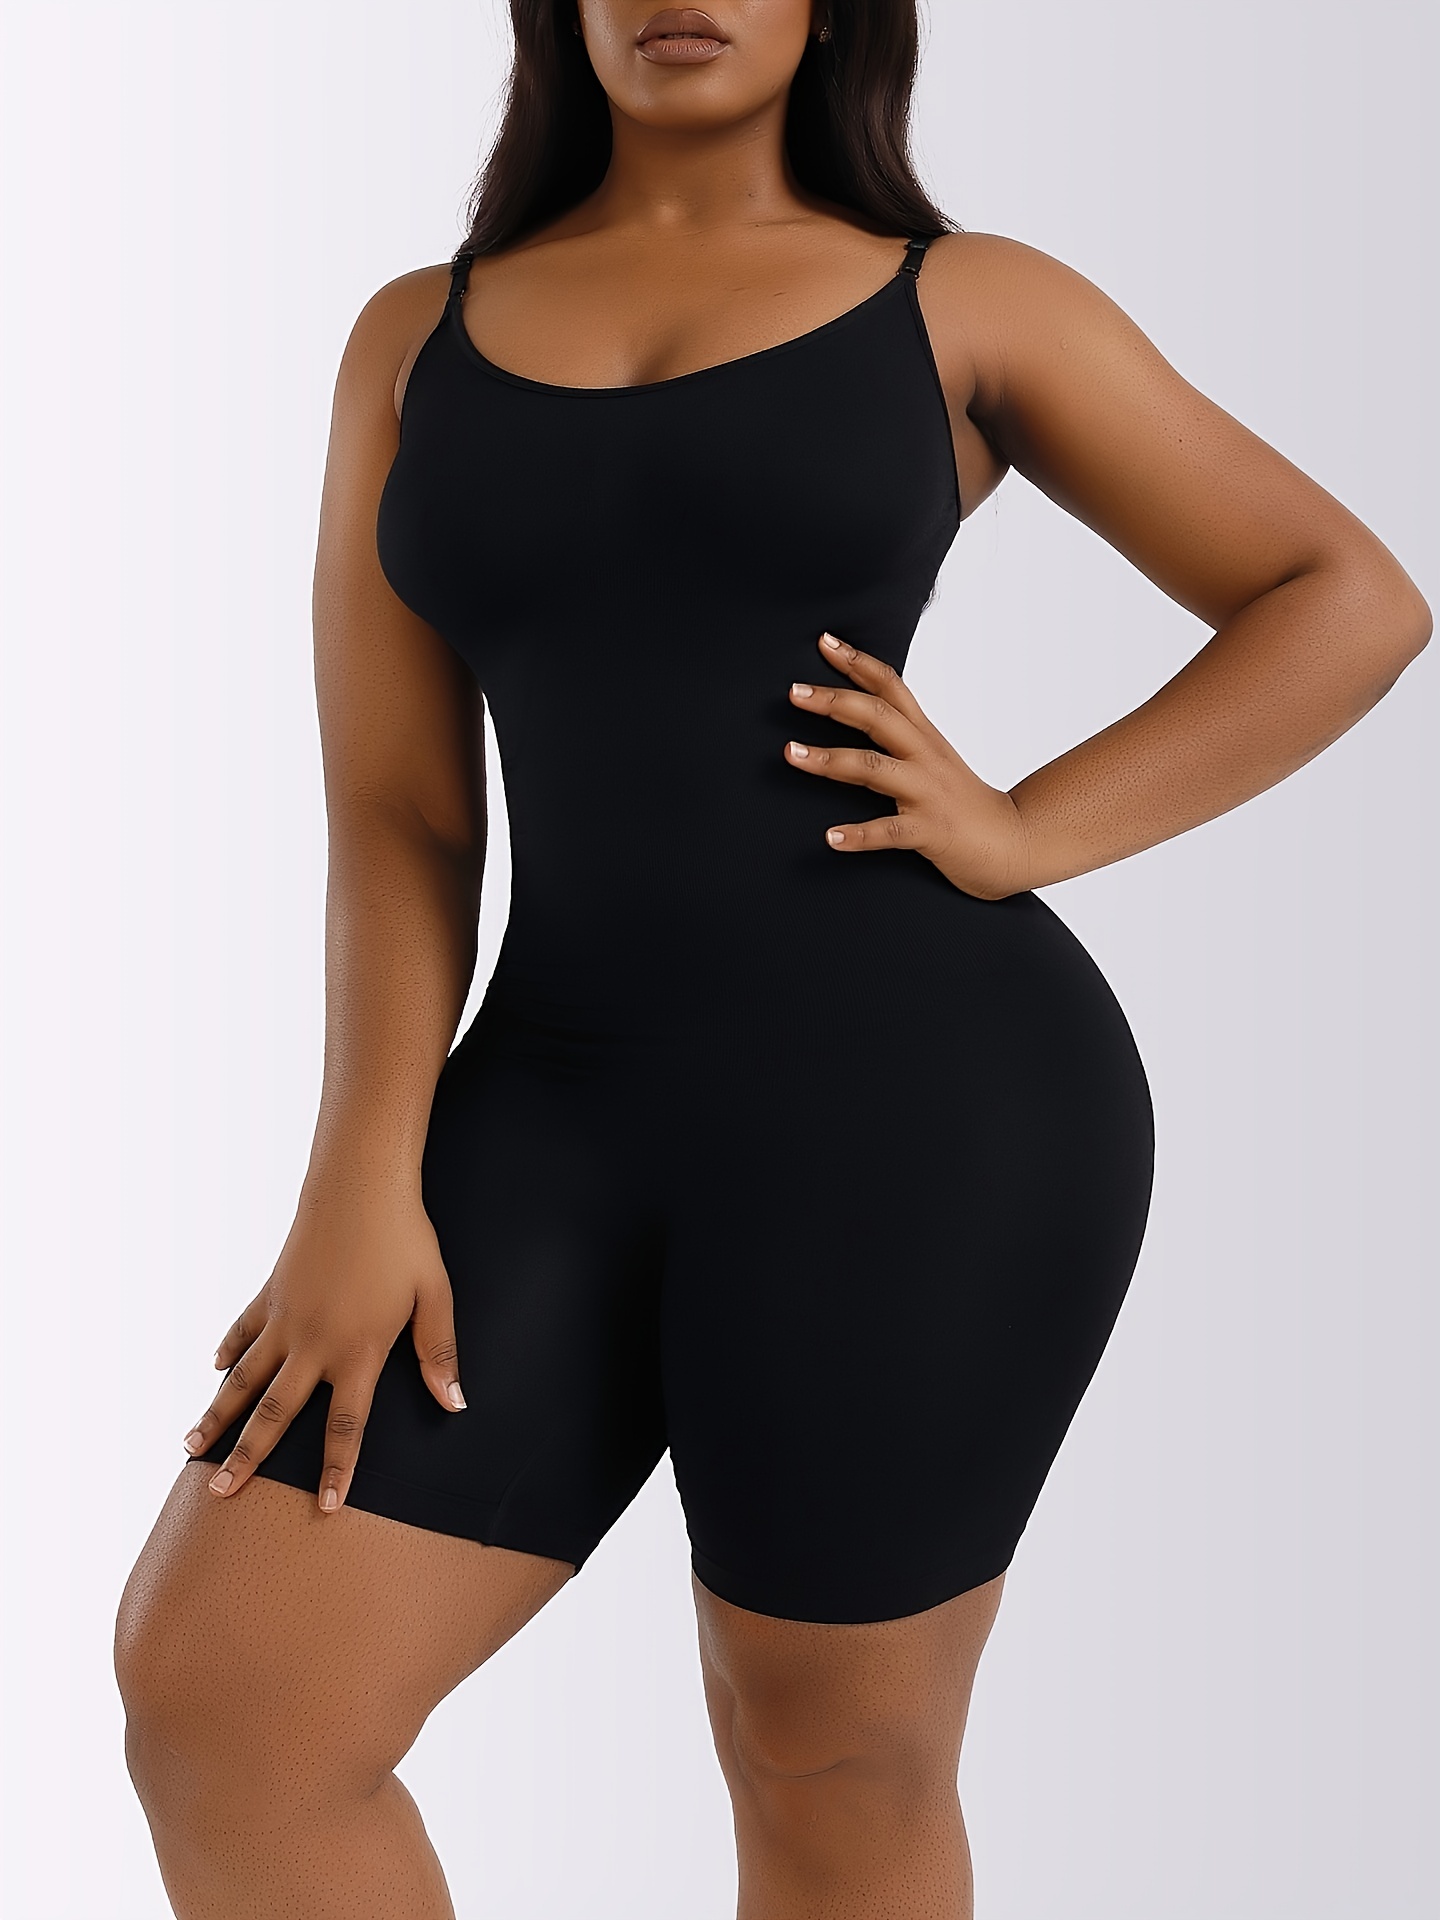 Shapermint on Instagram: Celebrate your shape in a versatile bodysuit that  combines comfort and style, which you can wear as a top. Shop yours today  and collect all 3 colors: Black, Beige